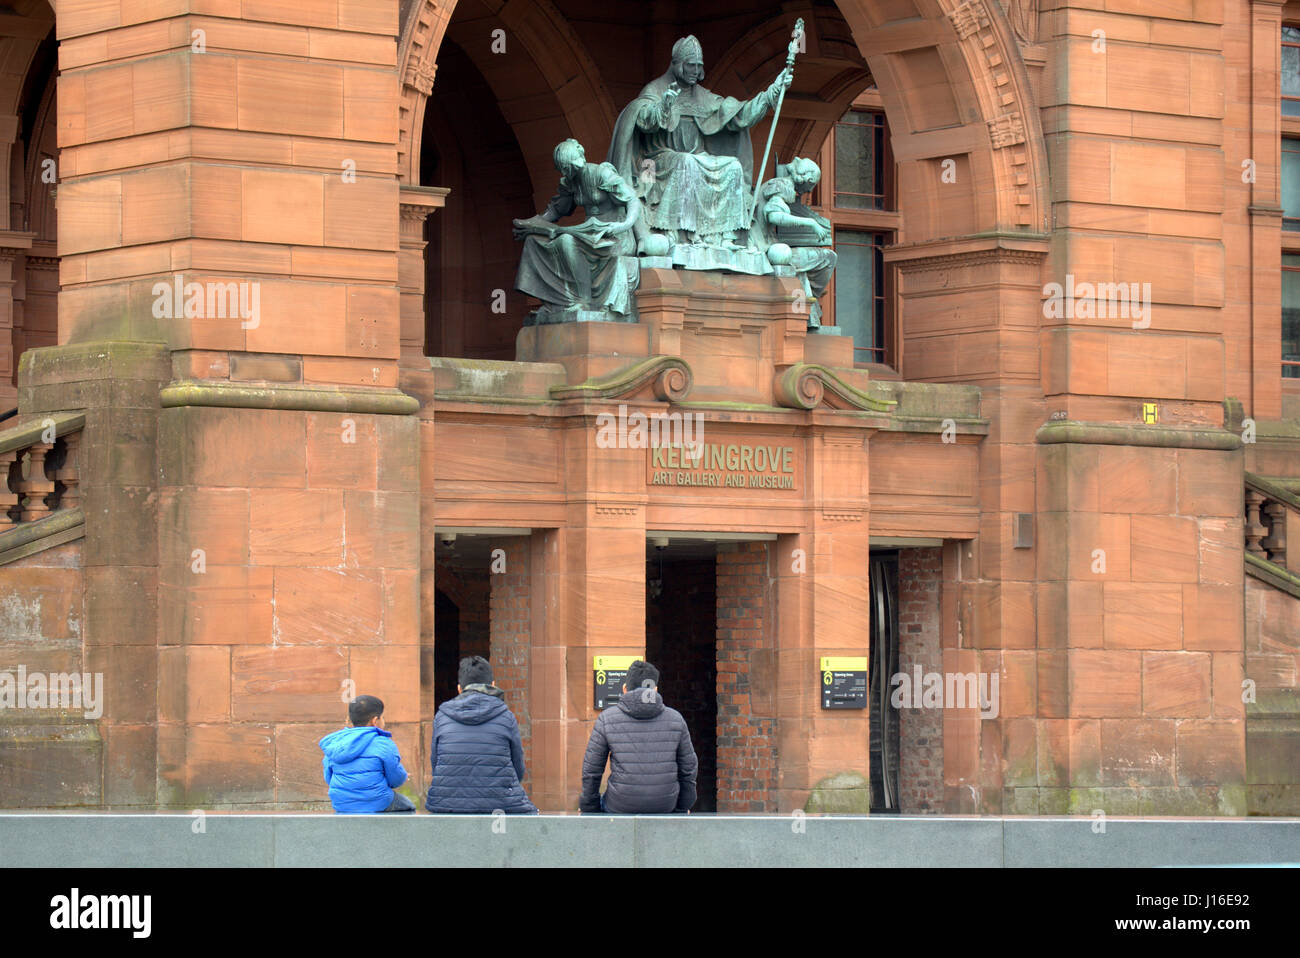 Kelvingrove Art Galleries and Museum front entrance with bishop statue Asian children Stock Photo